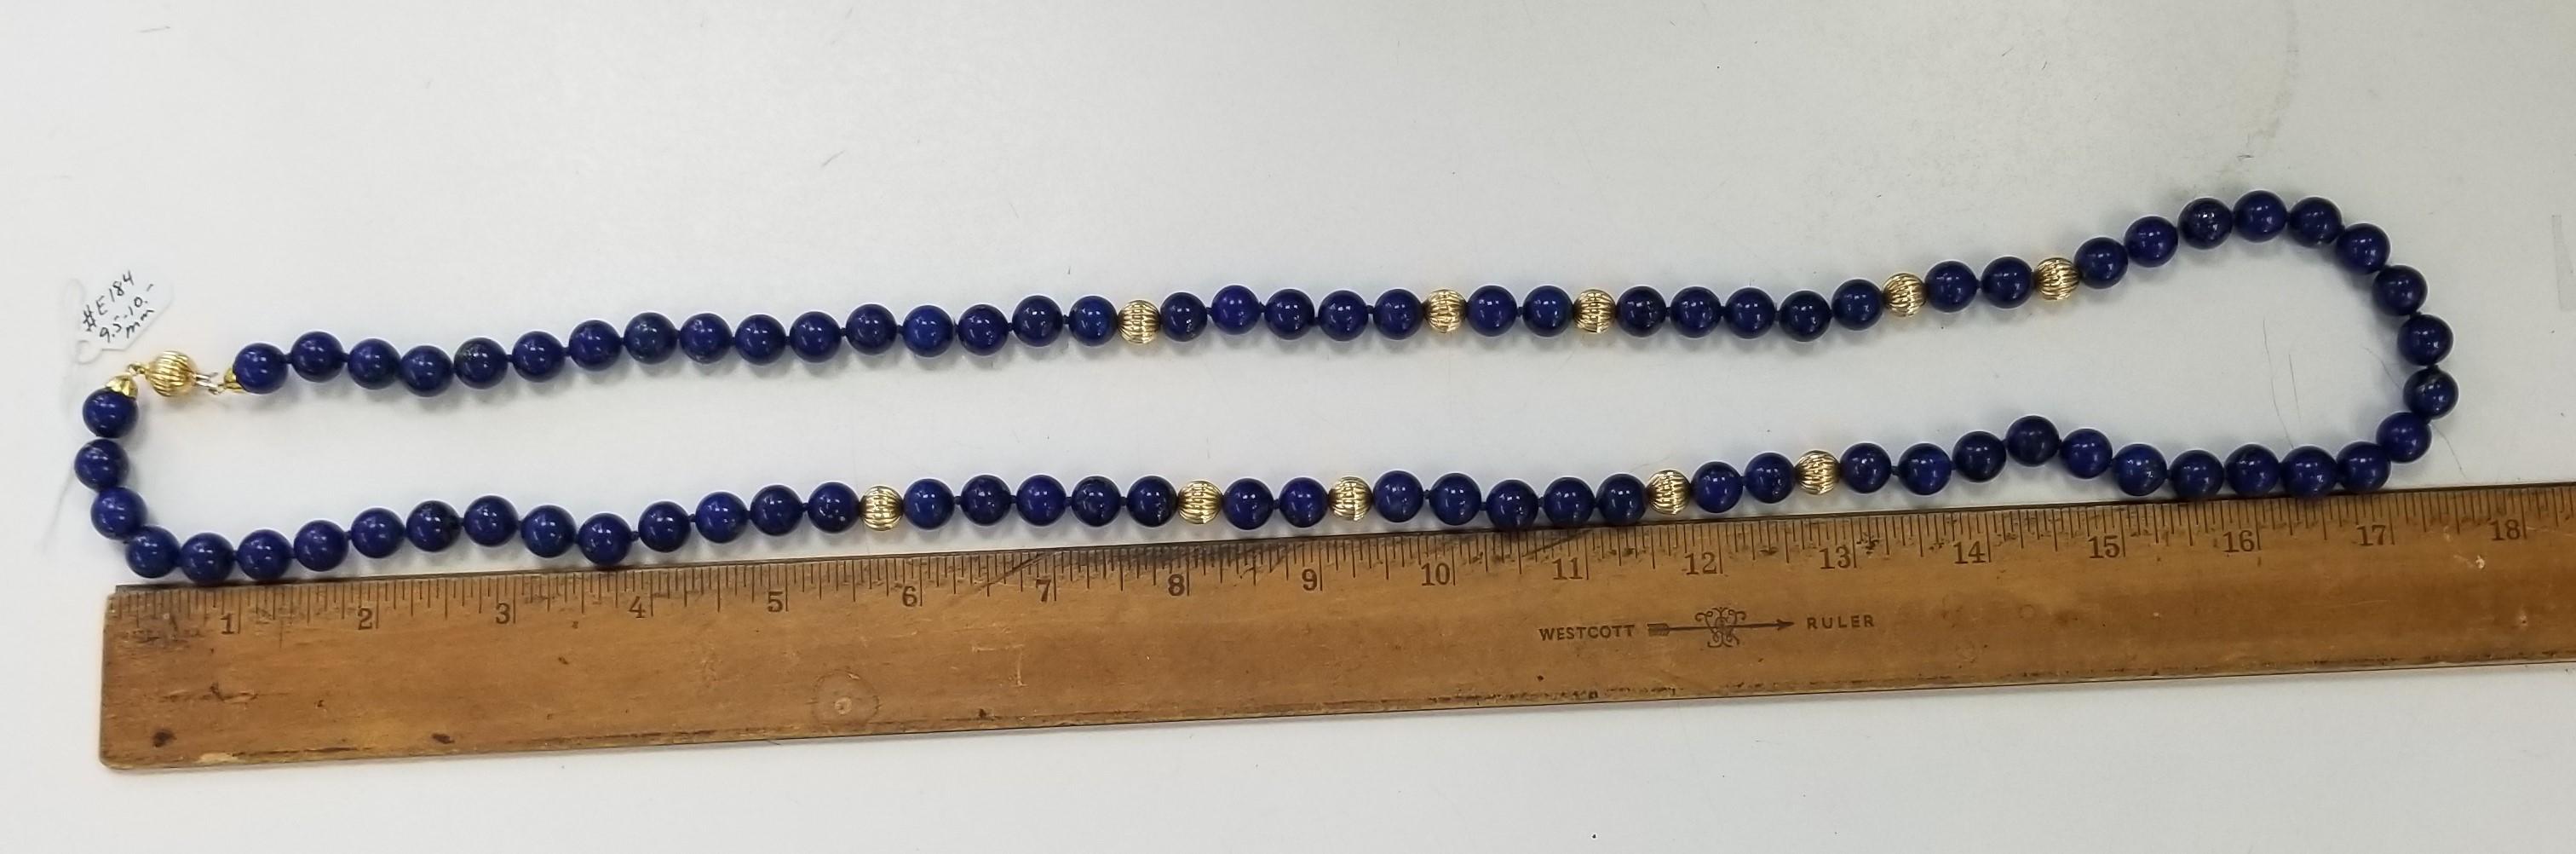 Lapis Lazuli 9.5 - 10mm Beads with 14k yellow gold Rondelle Necklace 36 inches For Sale 2